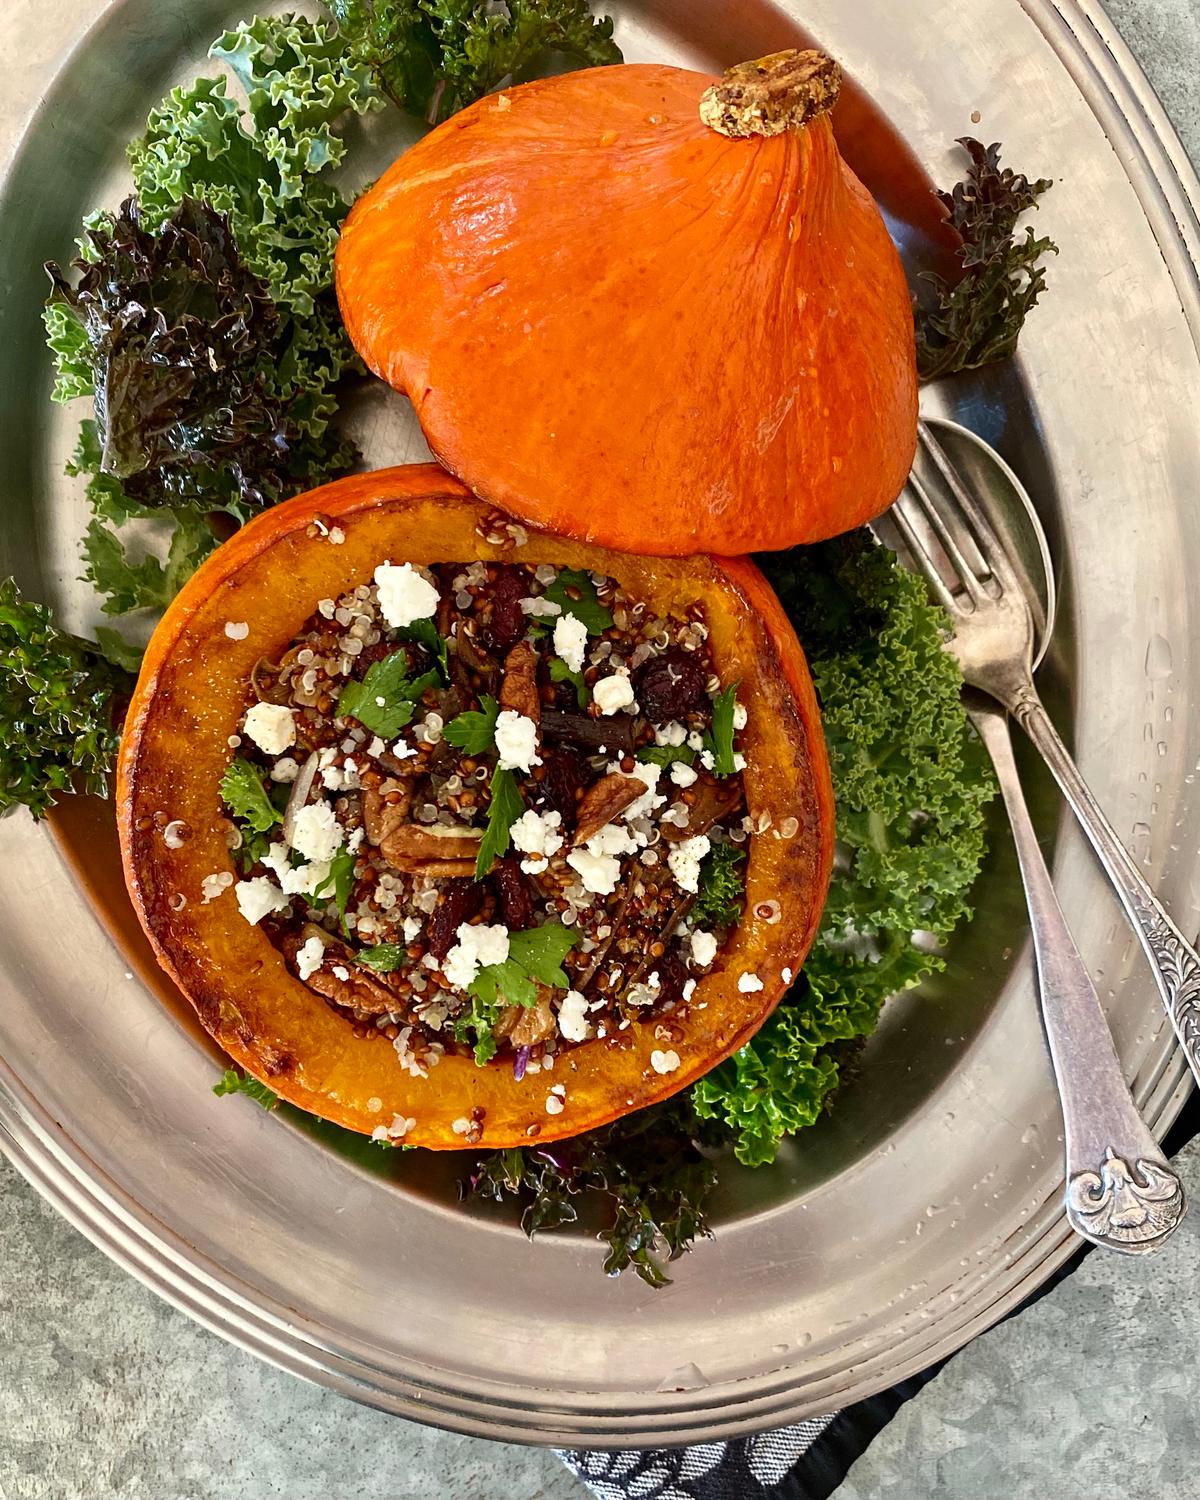 A stuffing of protein-rich quinoa, cranberries, nuts, and goat cheese turn half a squash into a whole meal. (Lynda Balslev for Tastefood)